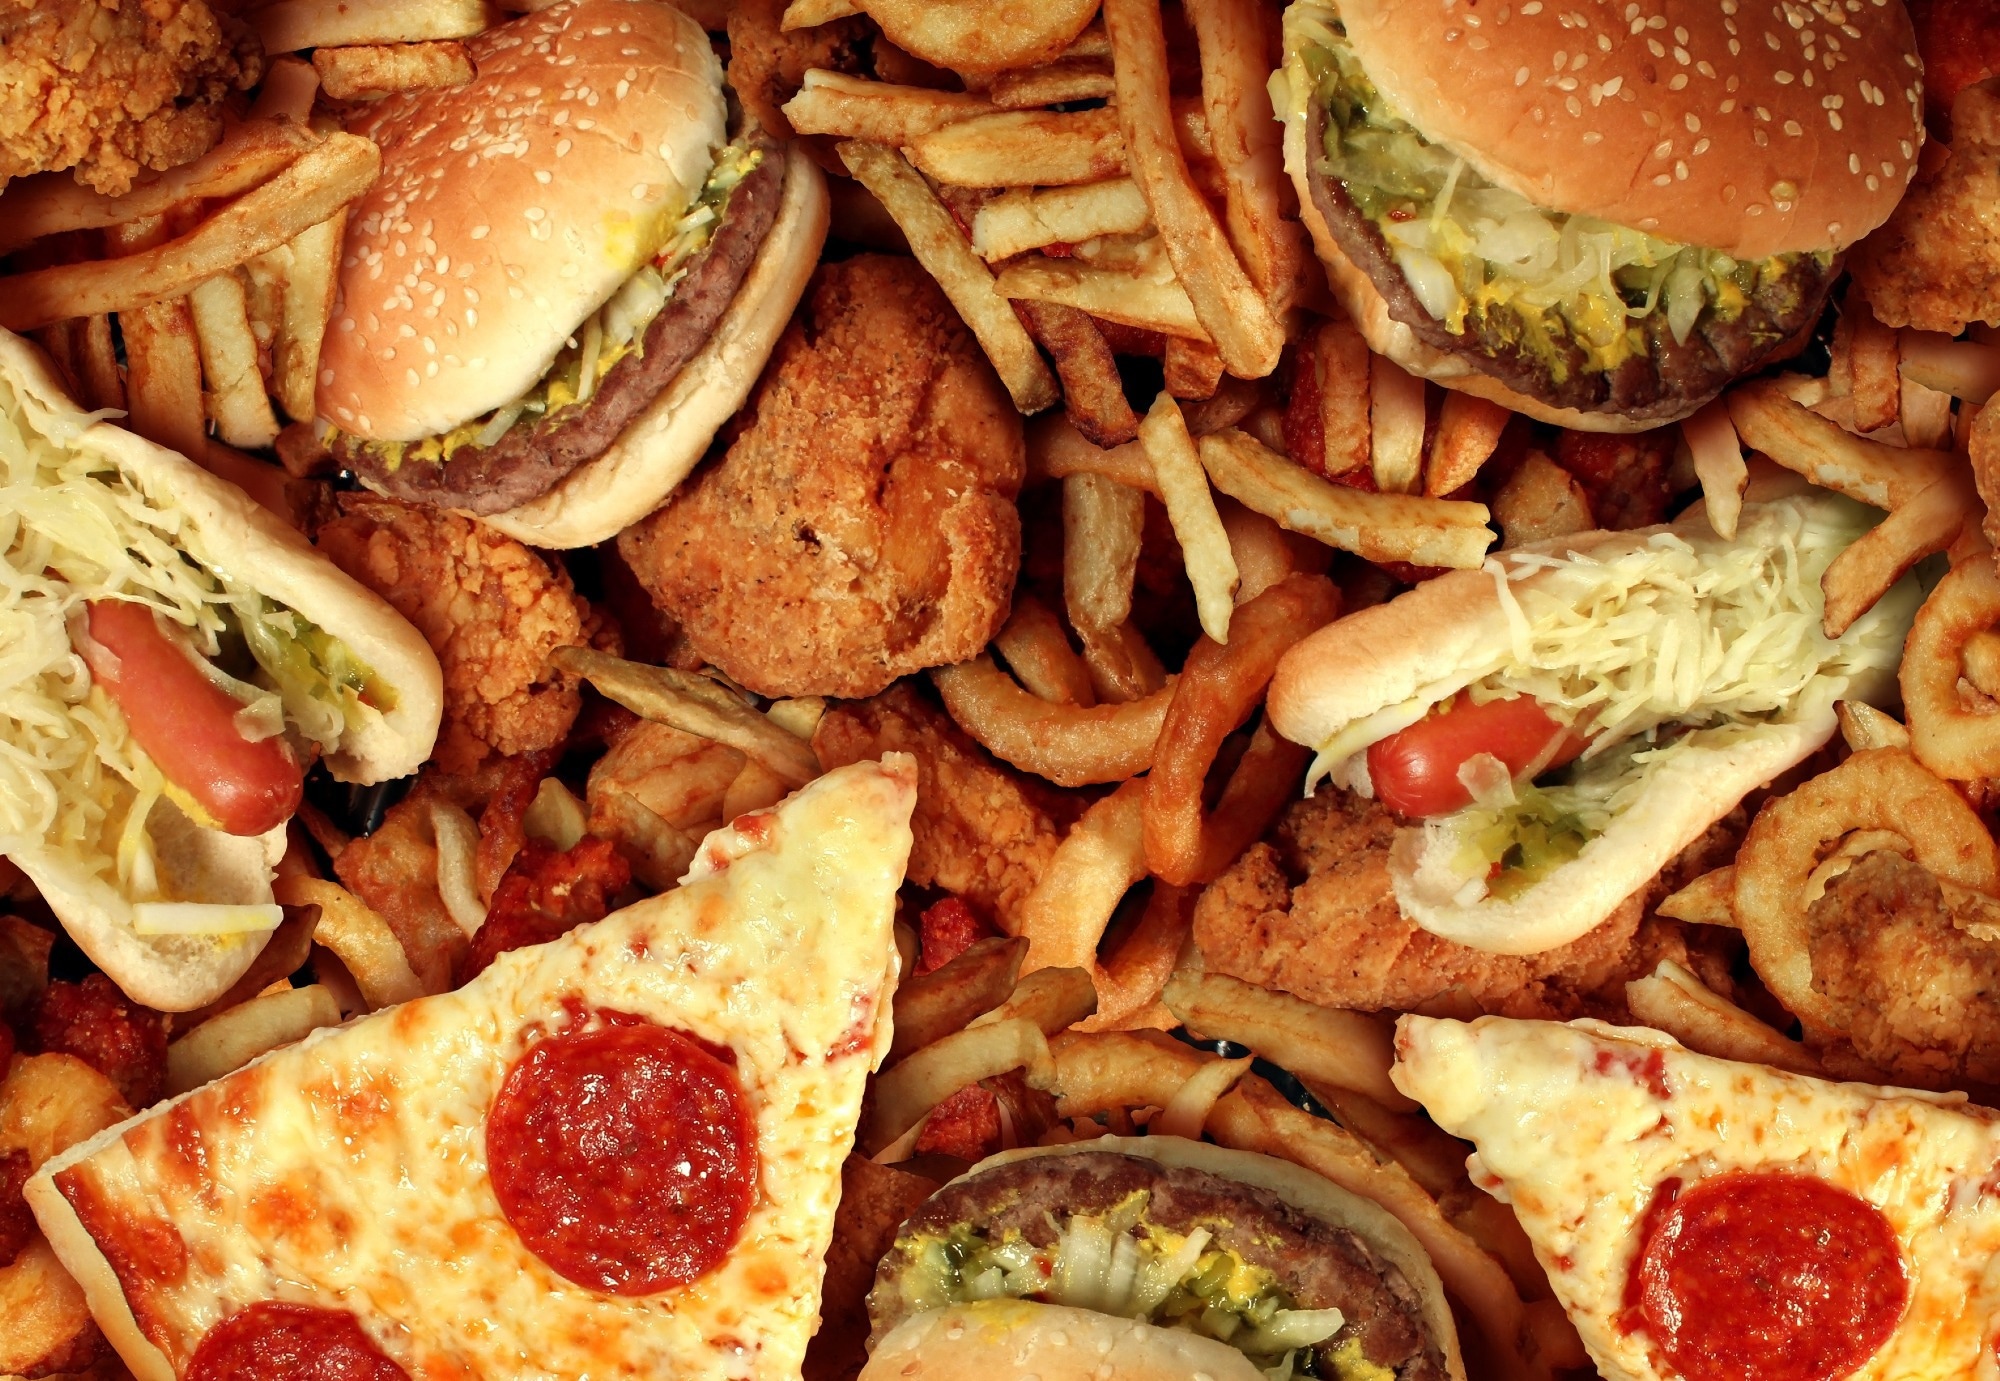 Study links ultra-processed foods to gut health risks